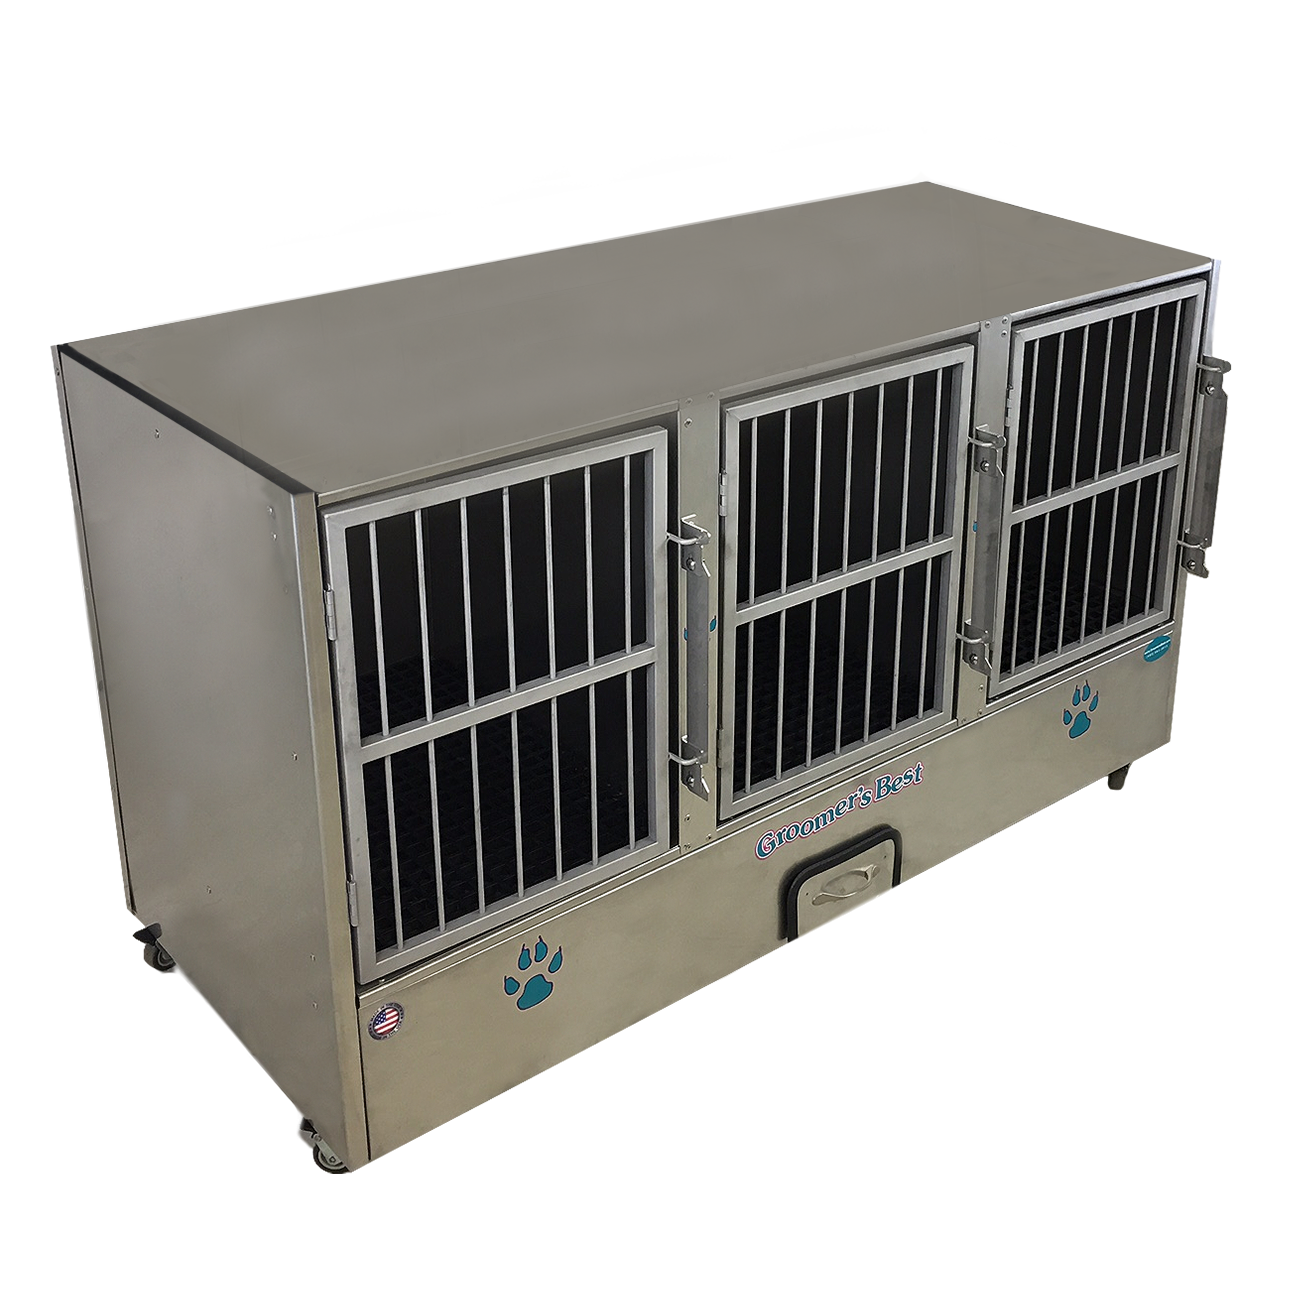 3 Unit Cage Bank- fully assembled